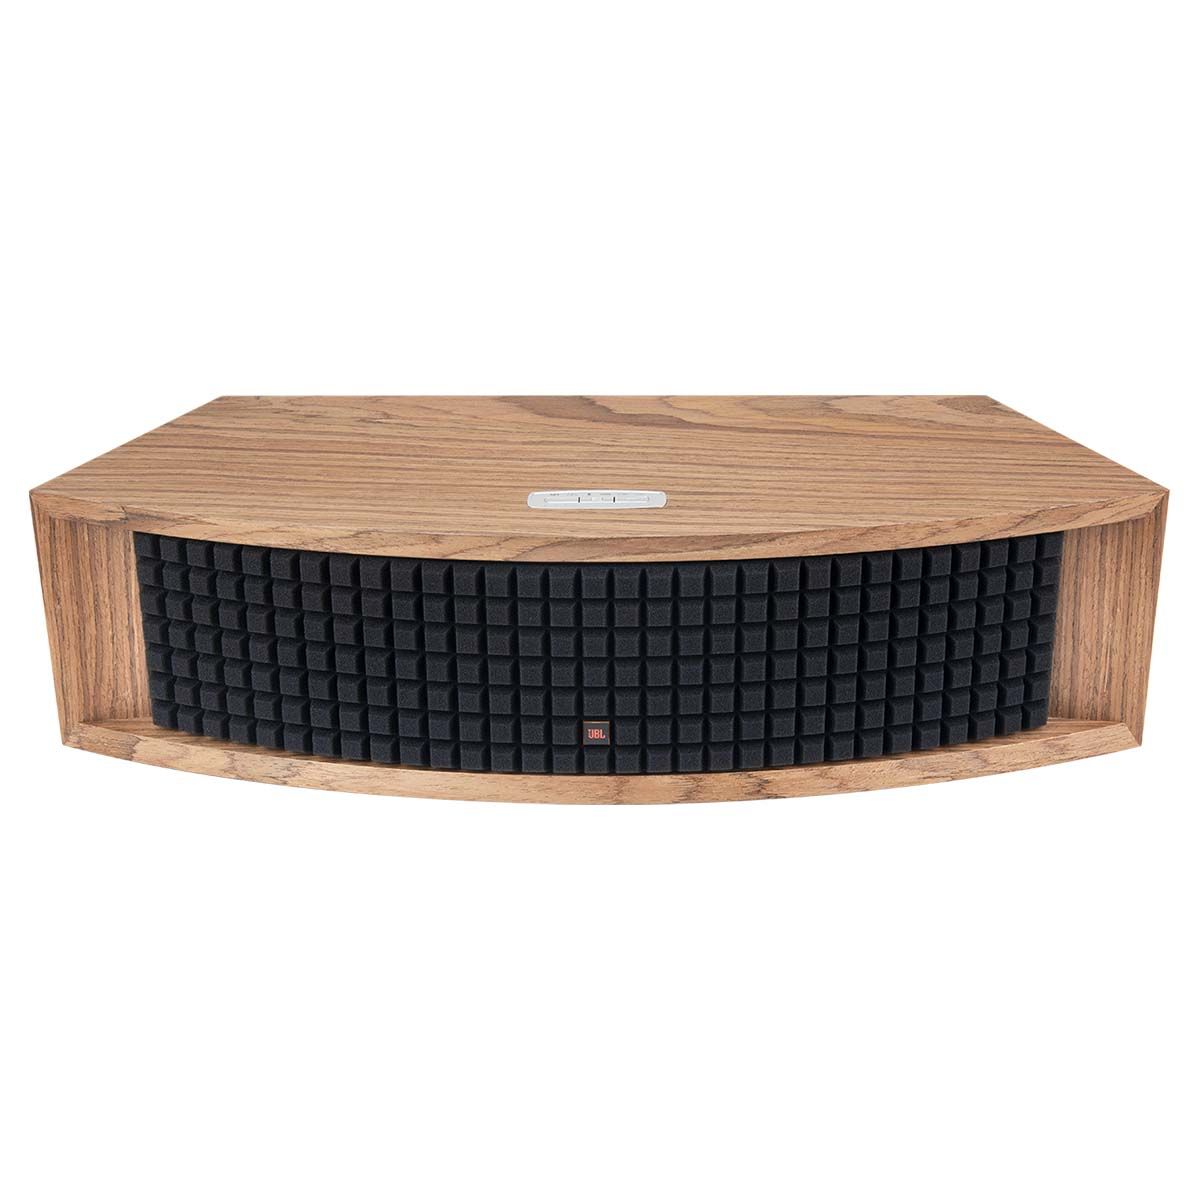 JBL L42ms Integrated Music System angled top view